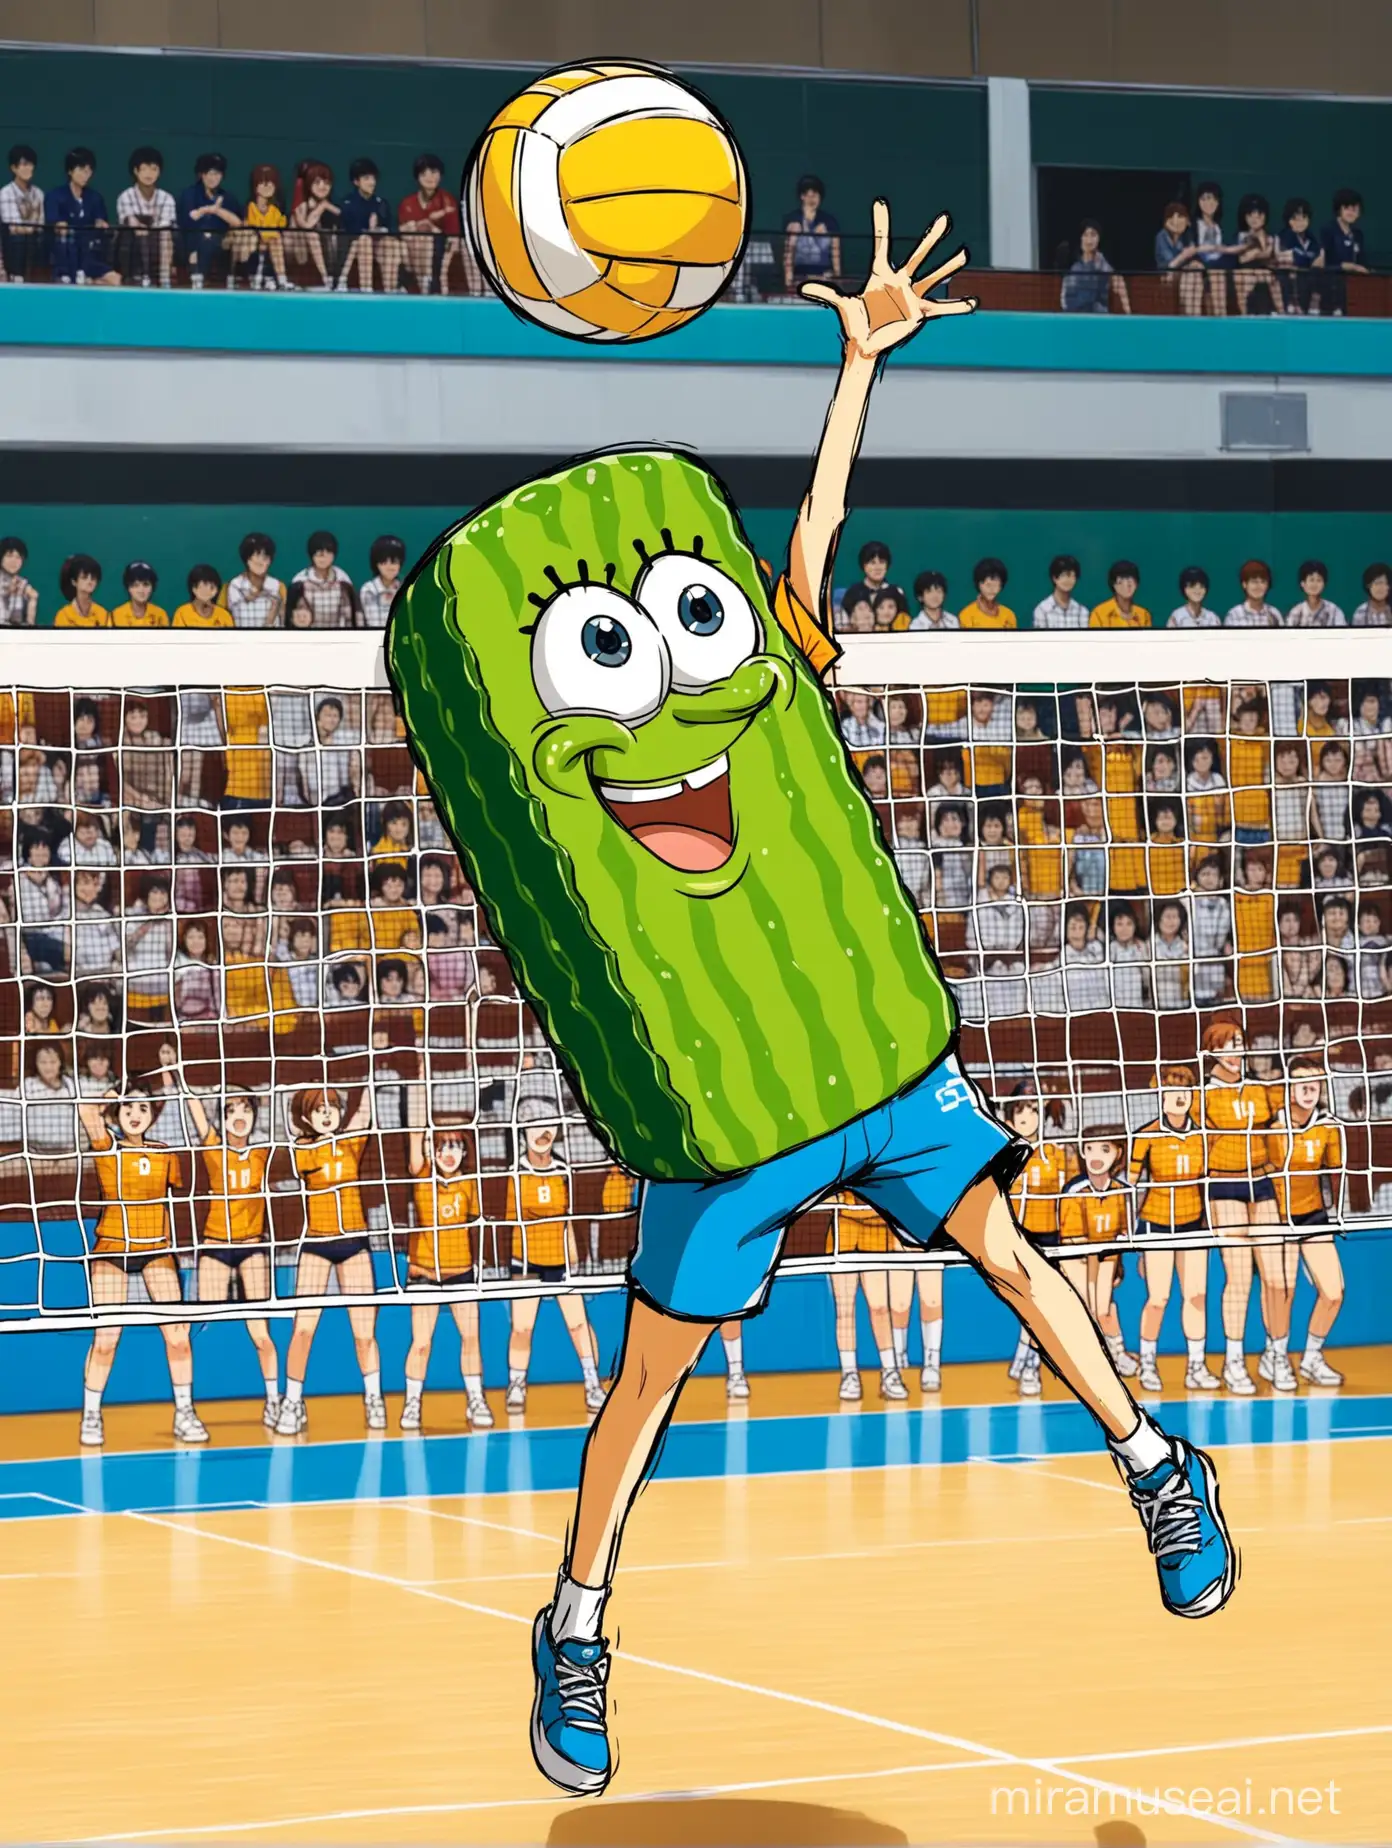 Using Haikyua volly ball anime as the artstyle and depiction.  In a similiar fashion to the spot and anime, I want Kevin the cucumber from spongebob to be midair hitting a whiffle ball with a minitaure raquet.  A net should be in front of him